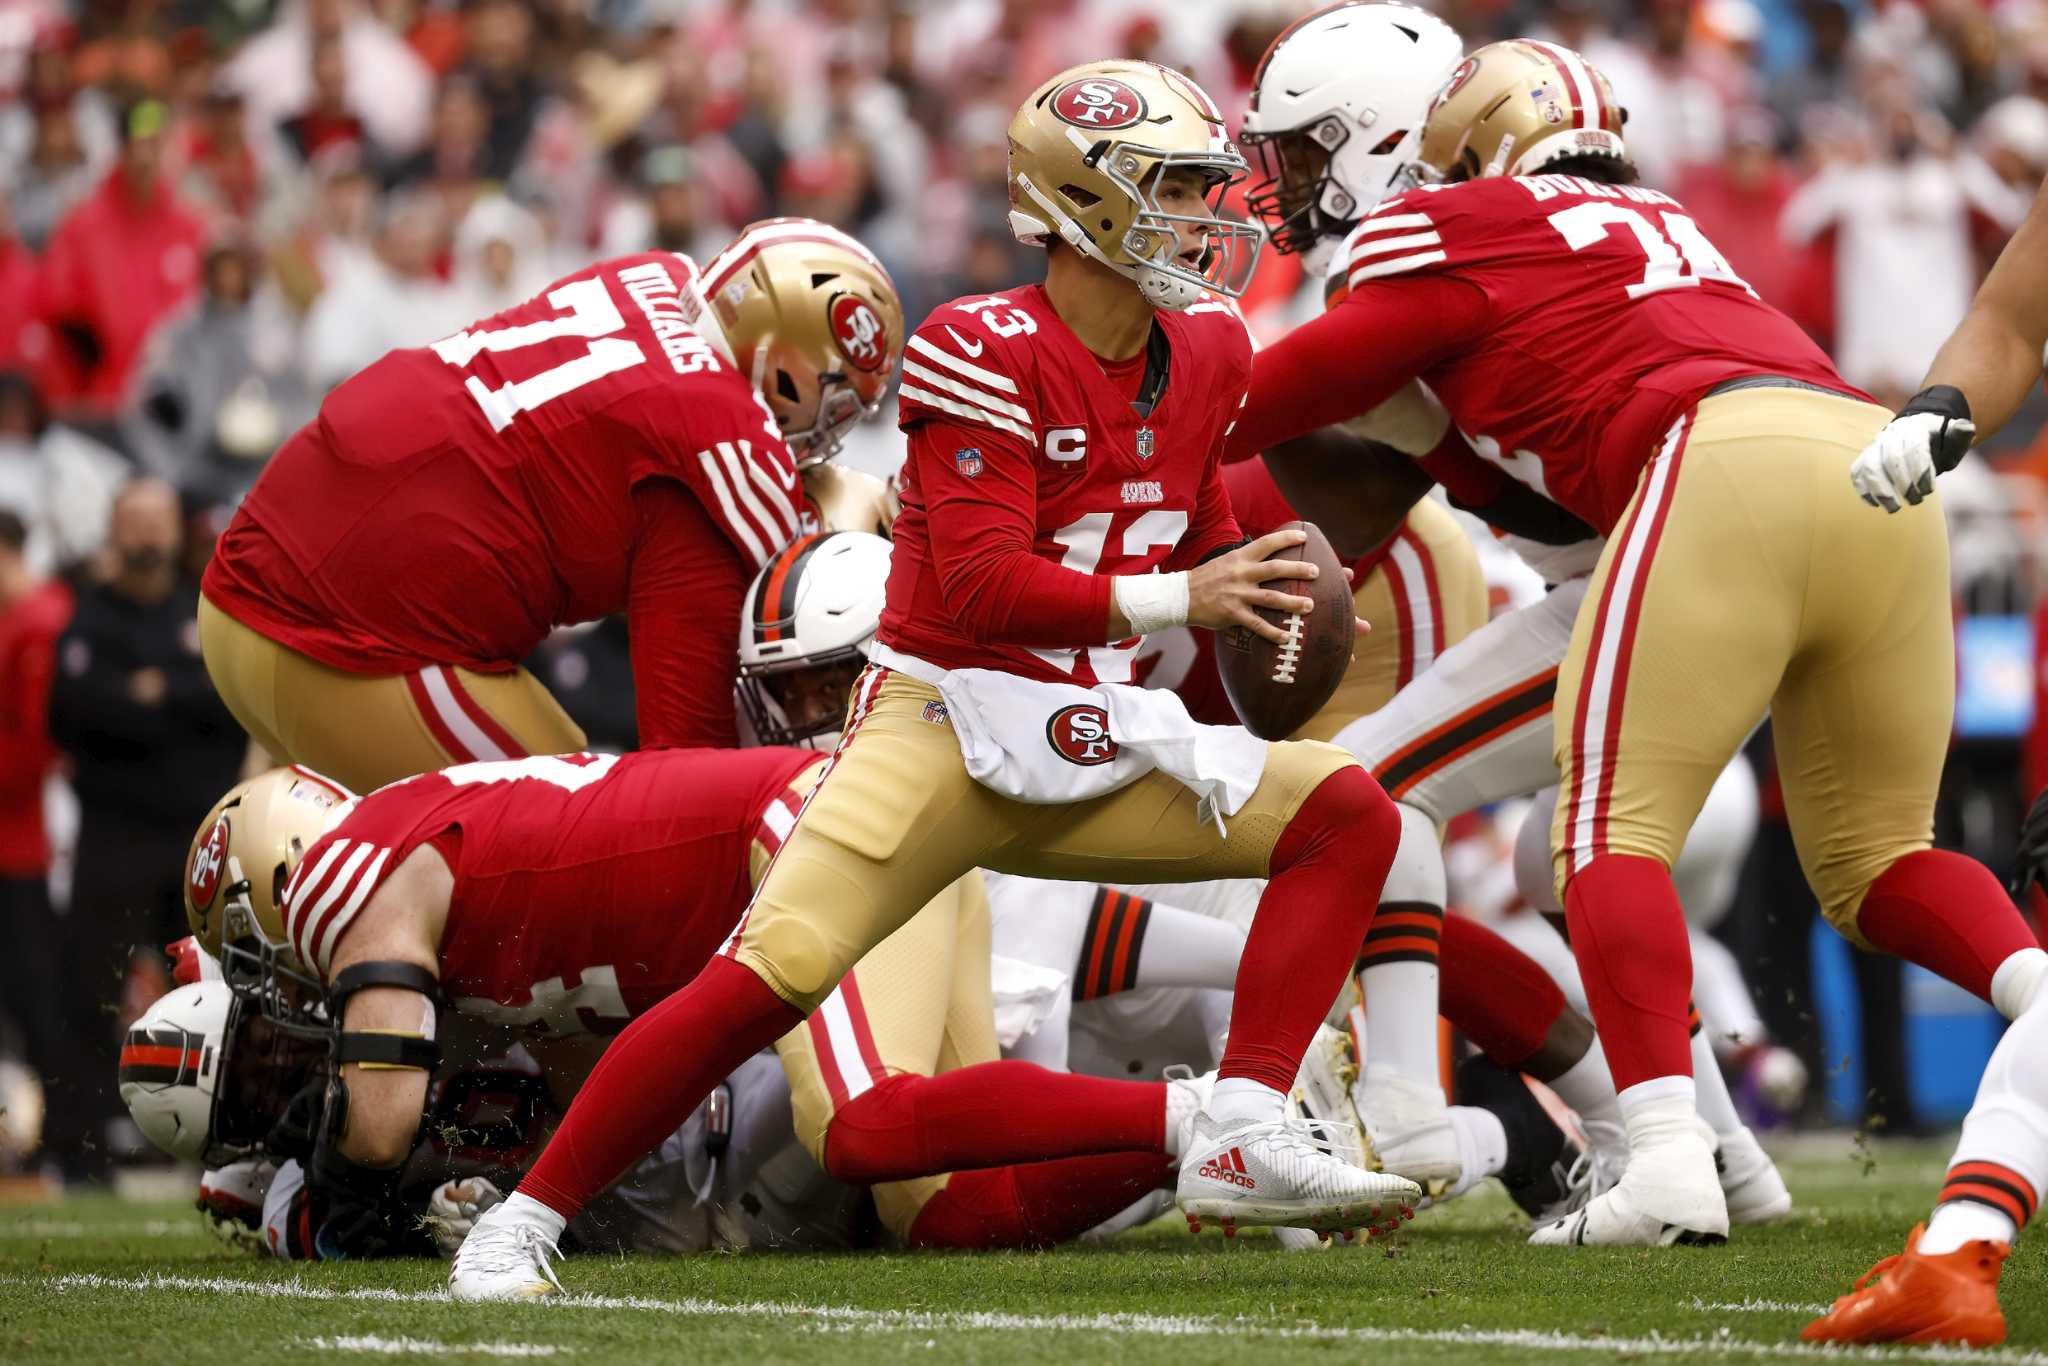 Banged-up 49ers and Brock Purdy look to make amends against Vikings